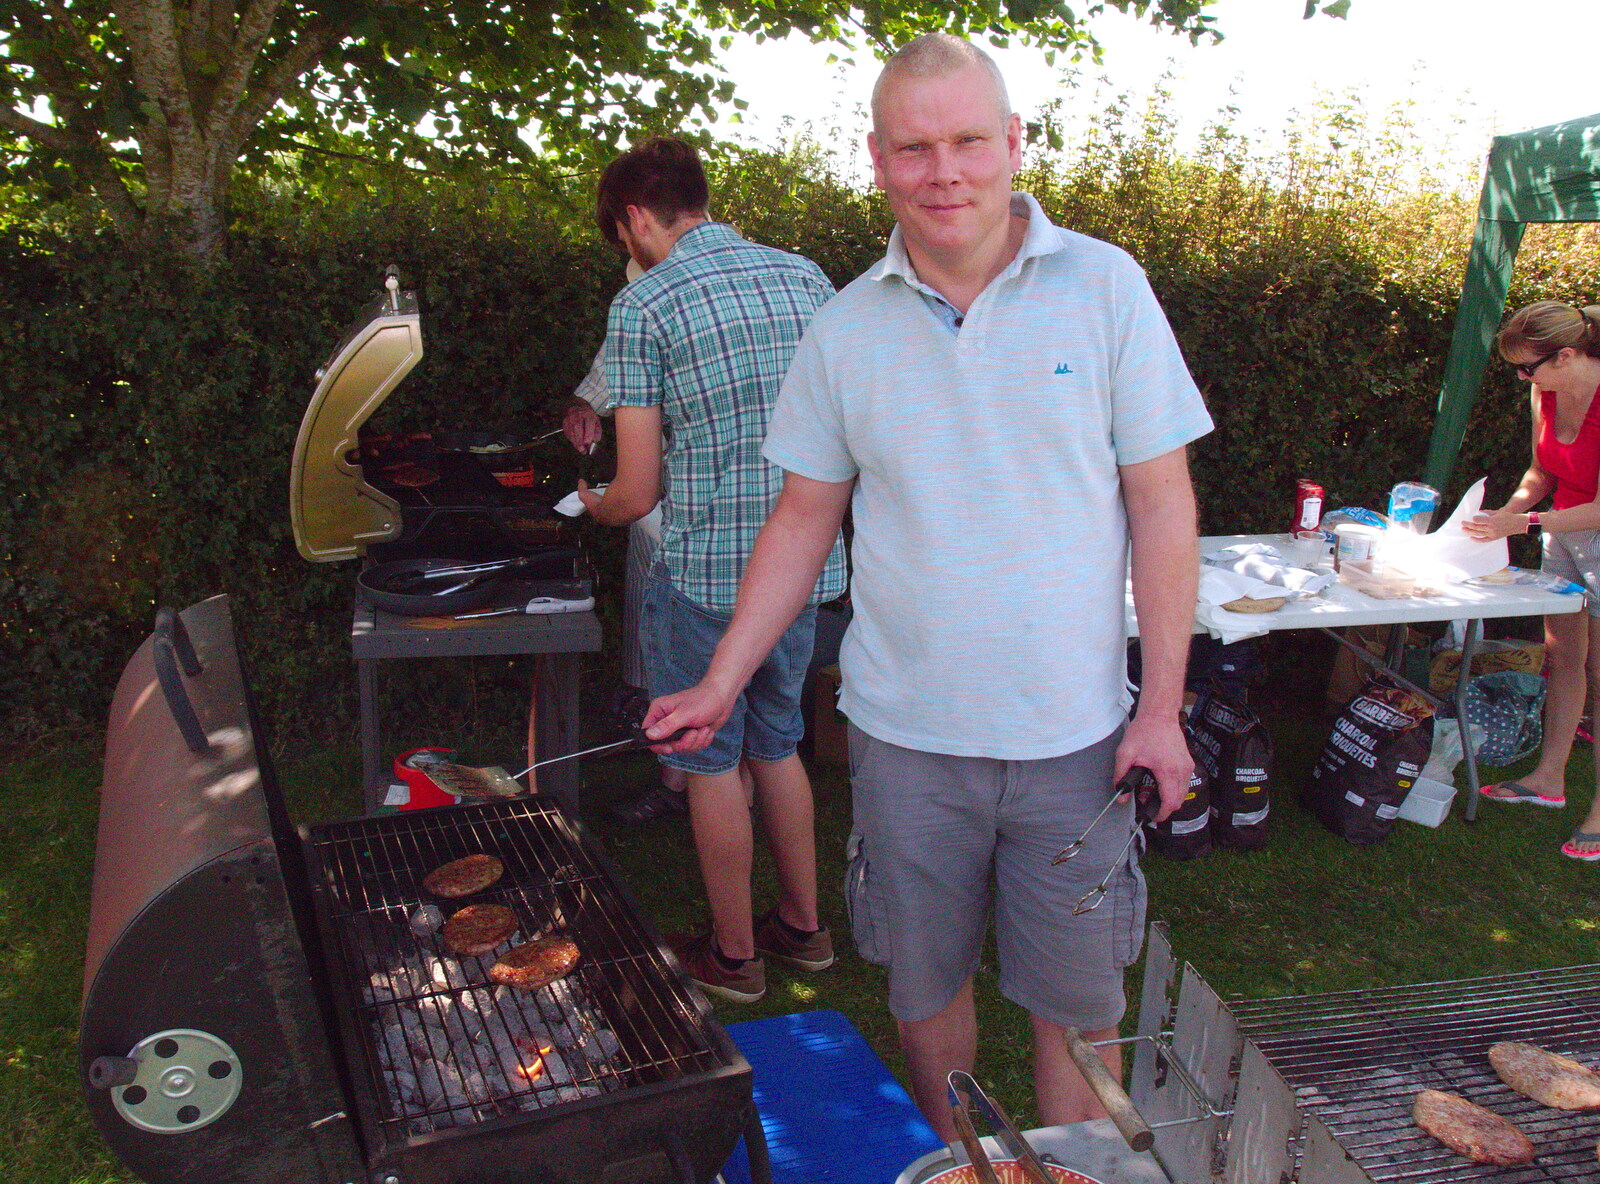 Billy-Boy's on the barbeque from GSB and the Gislingham Fete, Suffolk - 29th June 2019